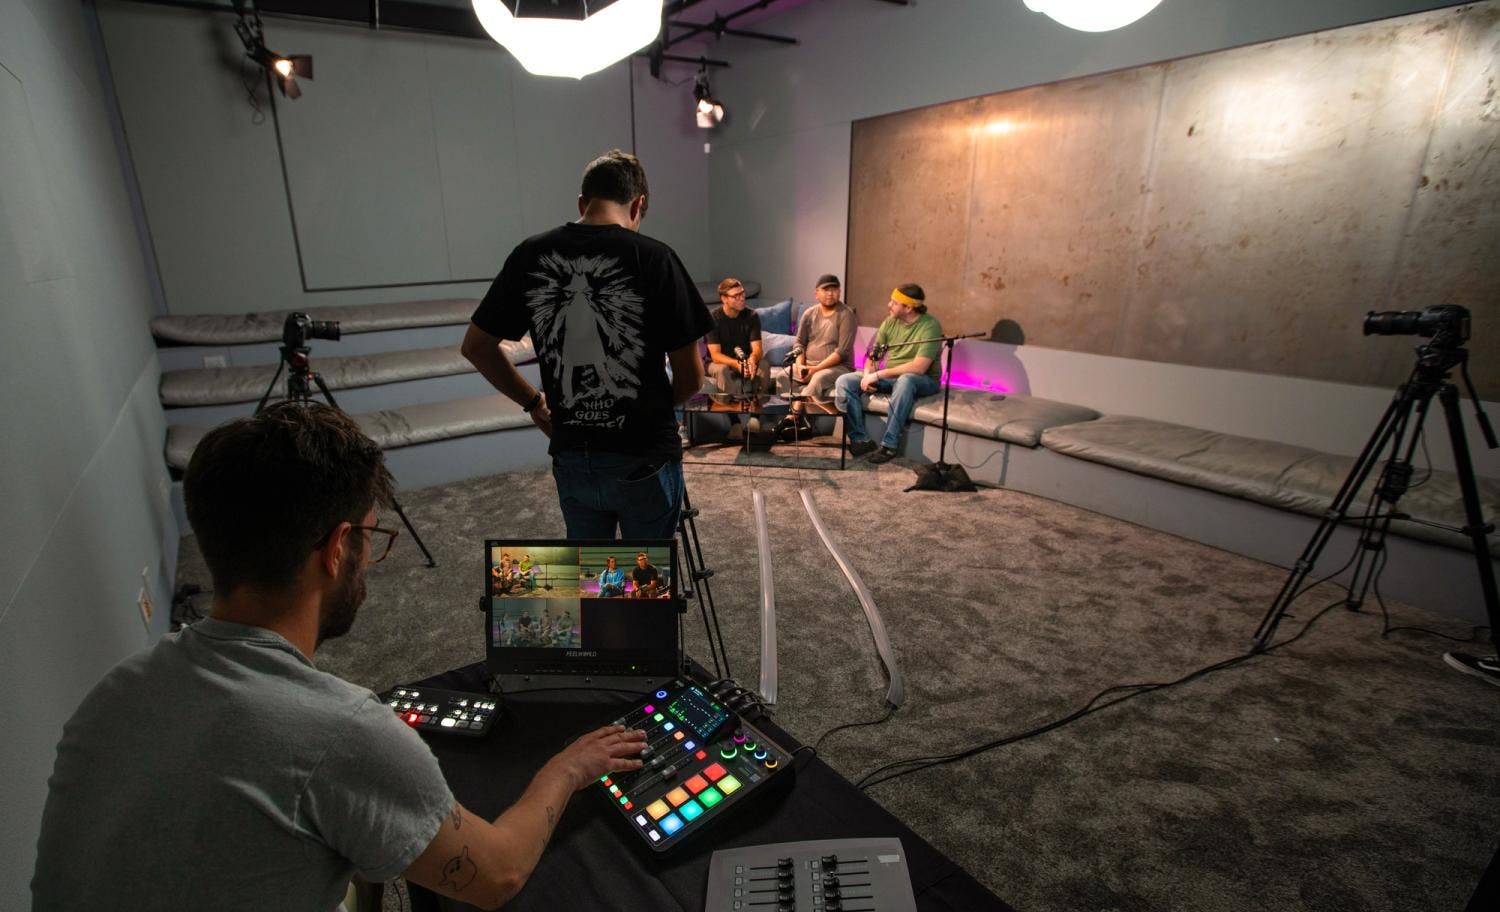 A behind-the-scenes view of a video recording set-up, focusing on the camera's display screen showing two people being filmed.